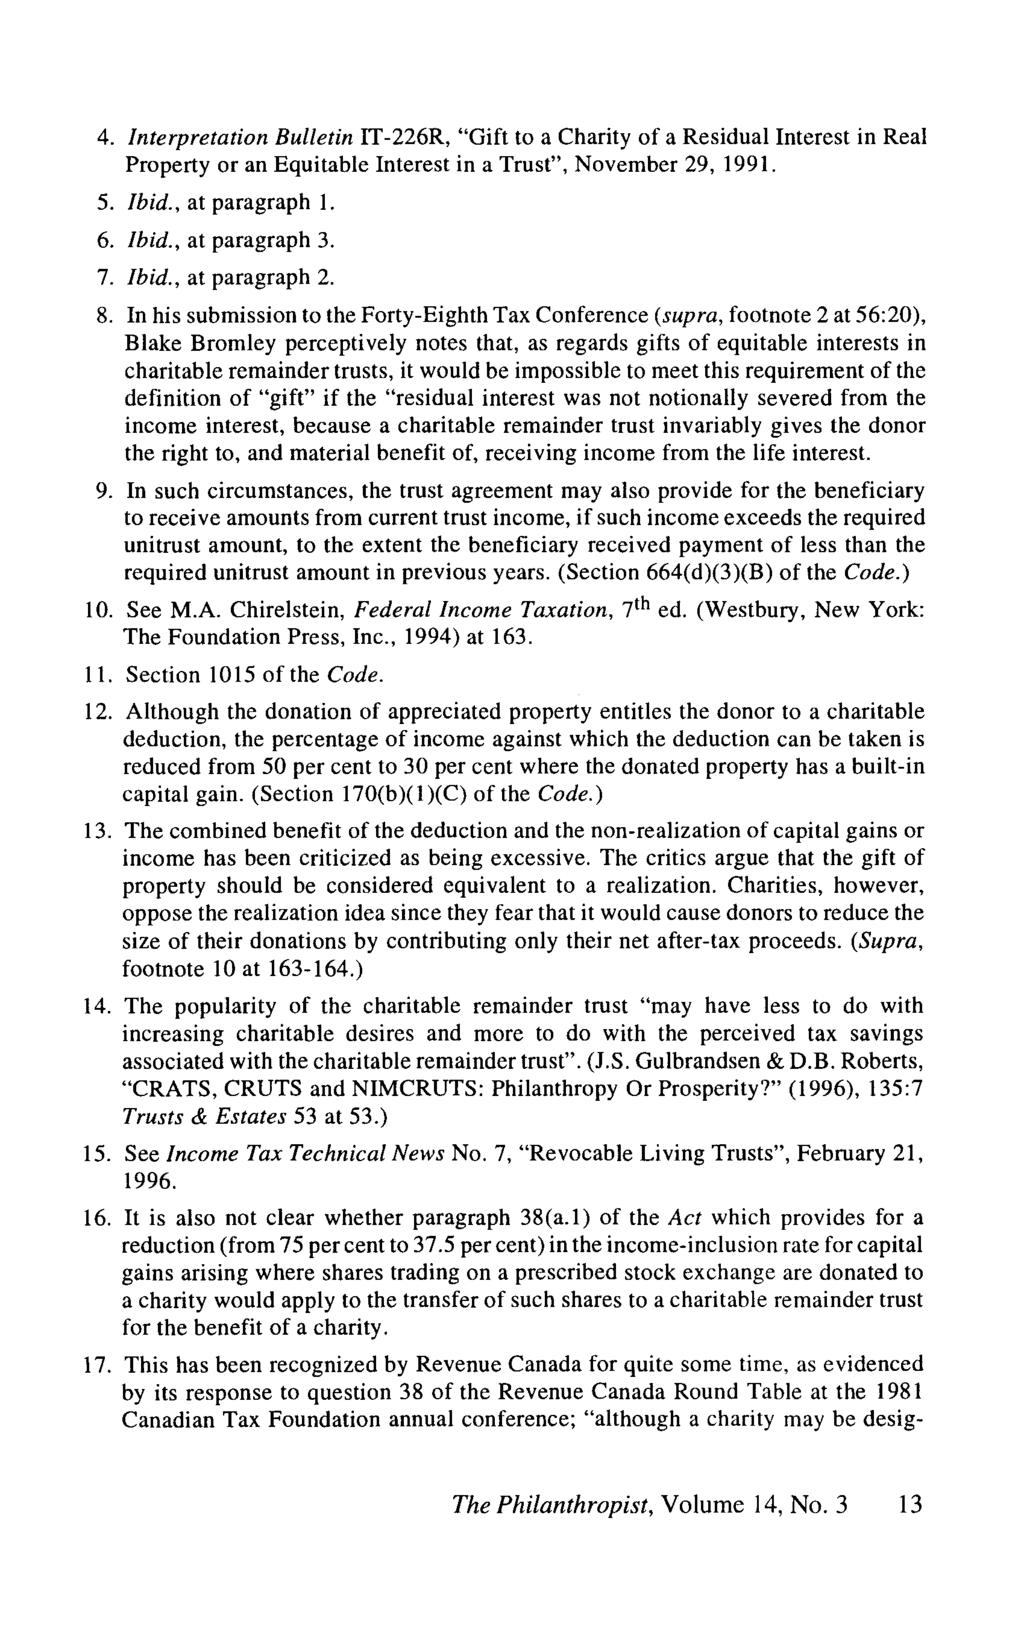 4. Interpretation Bulletin IT-226R, "Gift to a Charity of a Residual Interest in Real Property or an Equitable Interest in a Trust", November 29,1991. 5. Ibid., at paragraph 1. 6. Ibid., at paragraph 3.